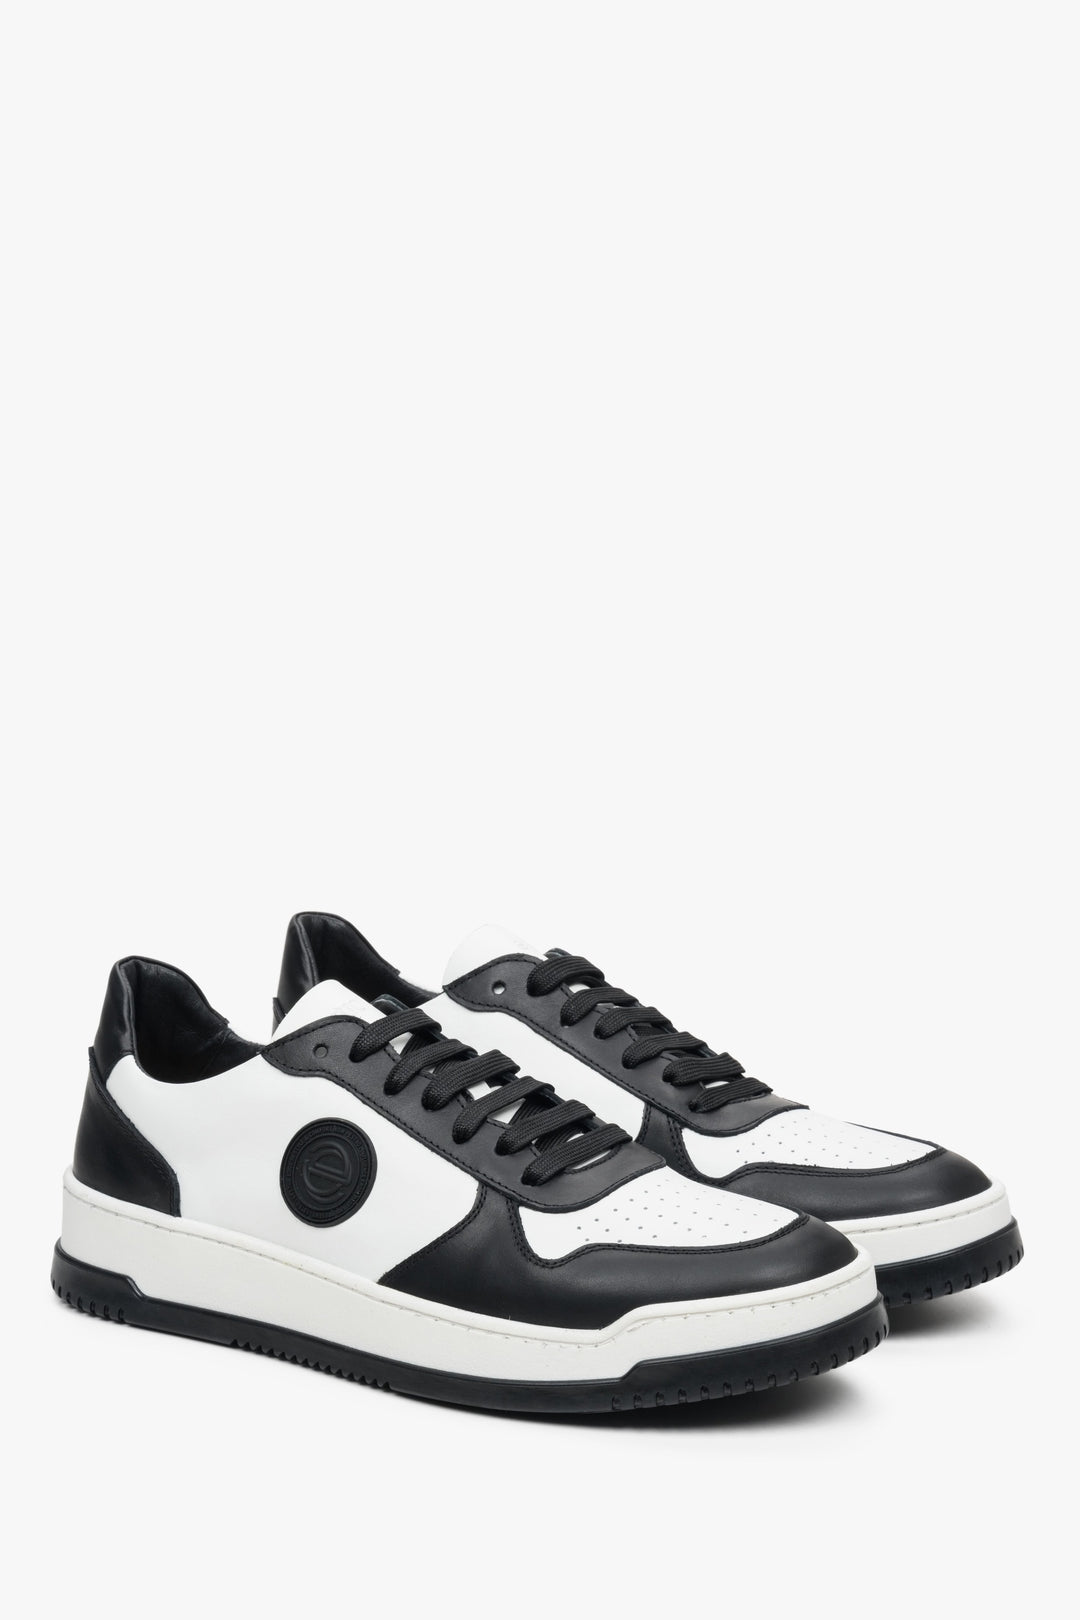 Men's leather sneakers in black and white by Estro.